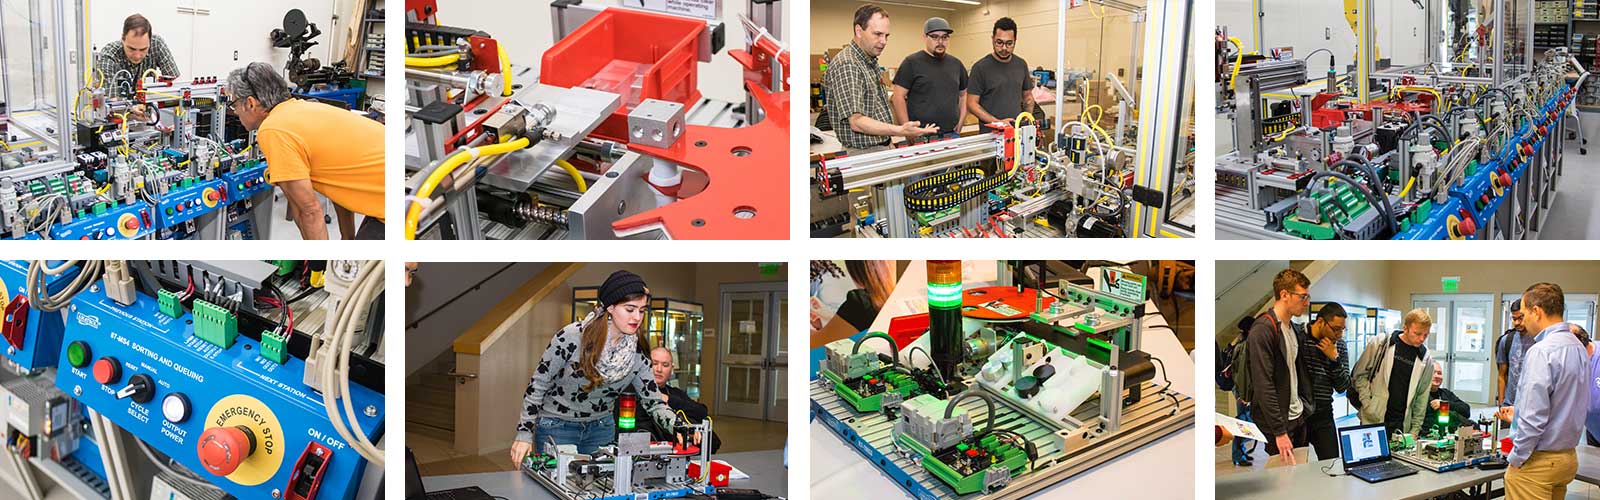 A selection of images of mechatronics equipment and students working in the mechatronics lab